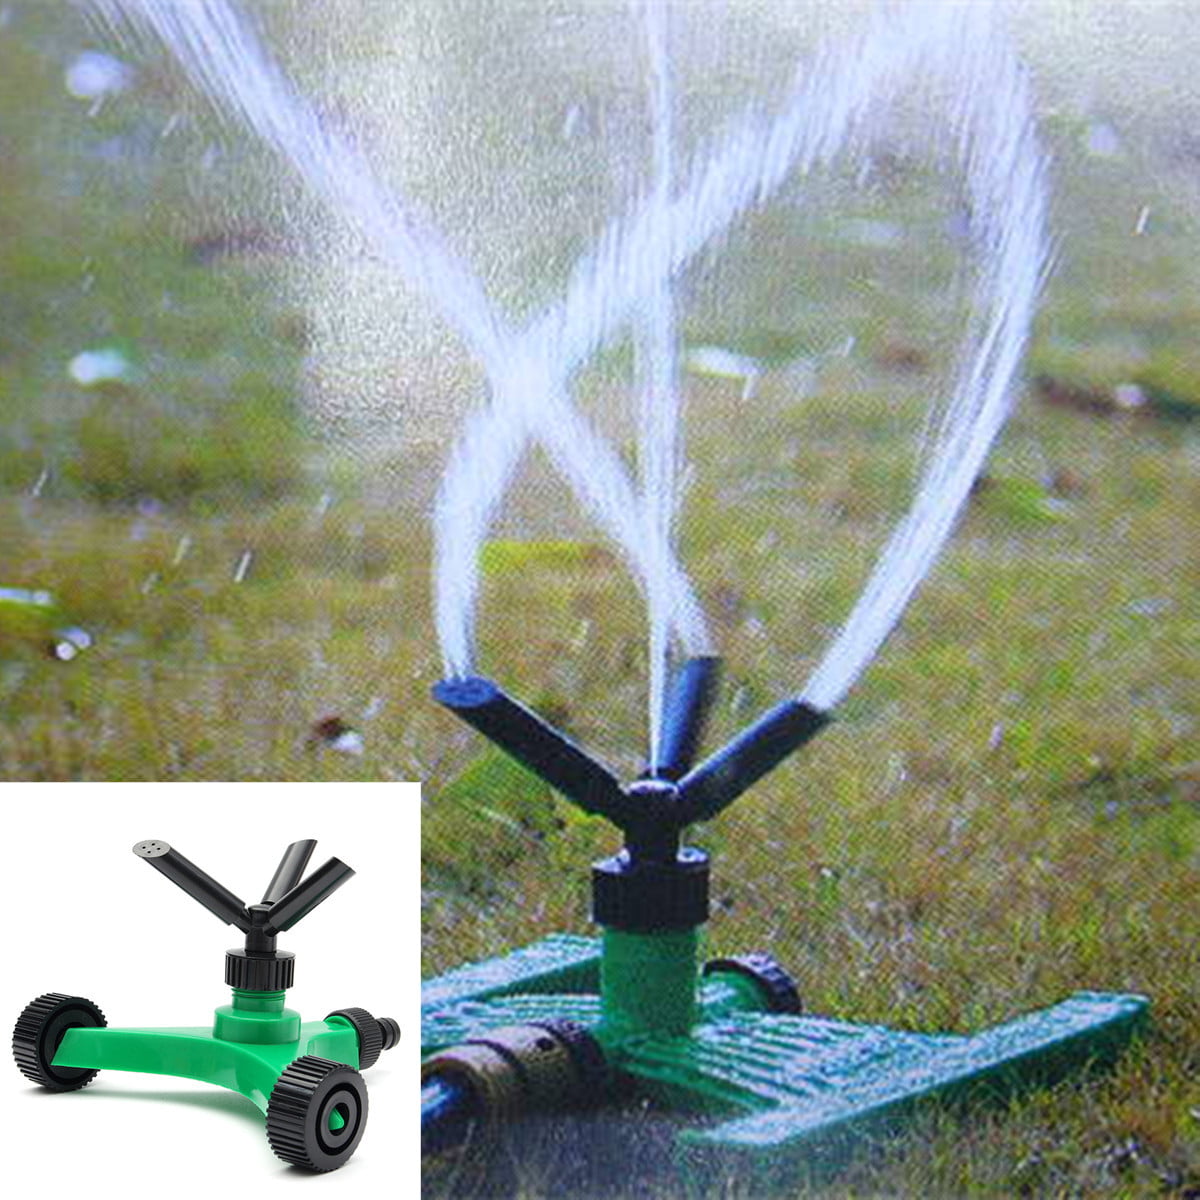 360° Garden Sprinkler Automatic Lawn Water Irrigation Rotating Watering System 